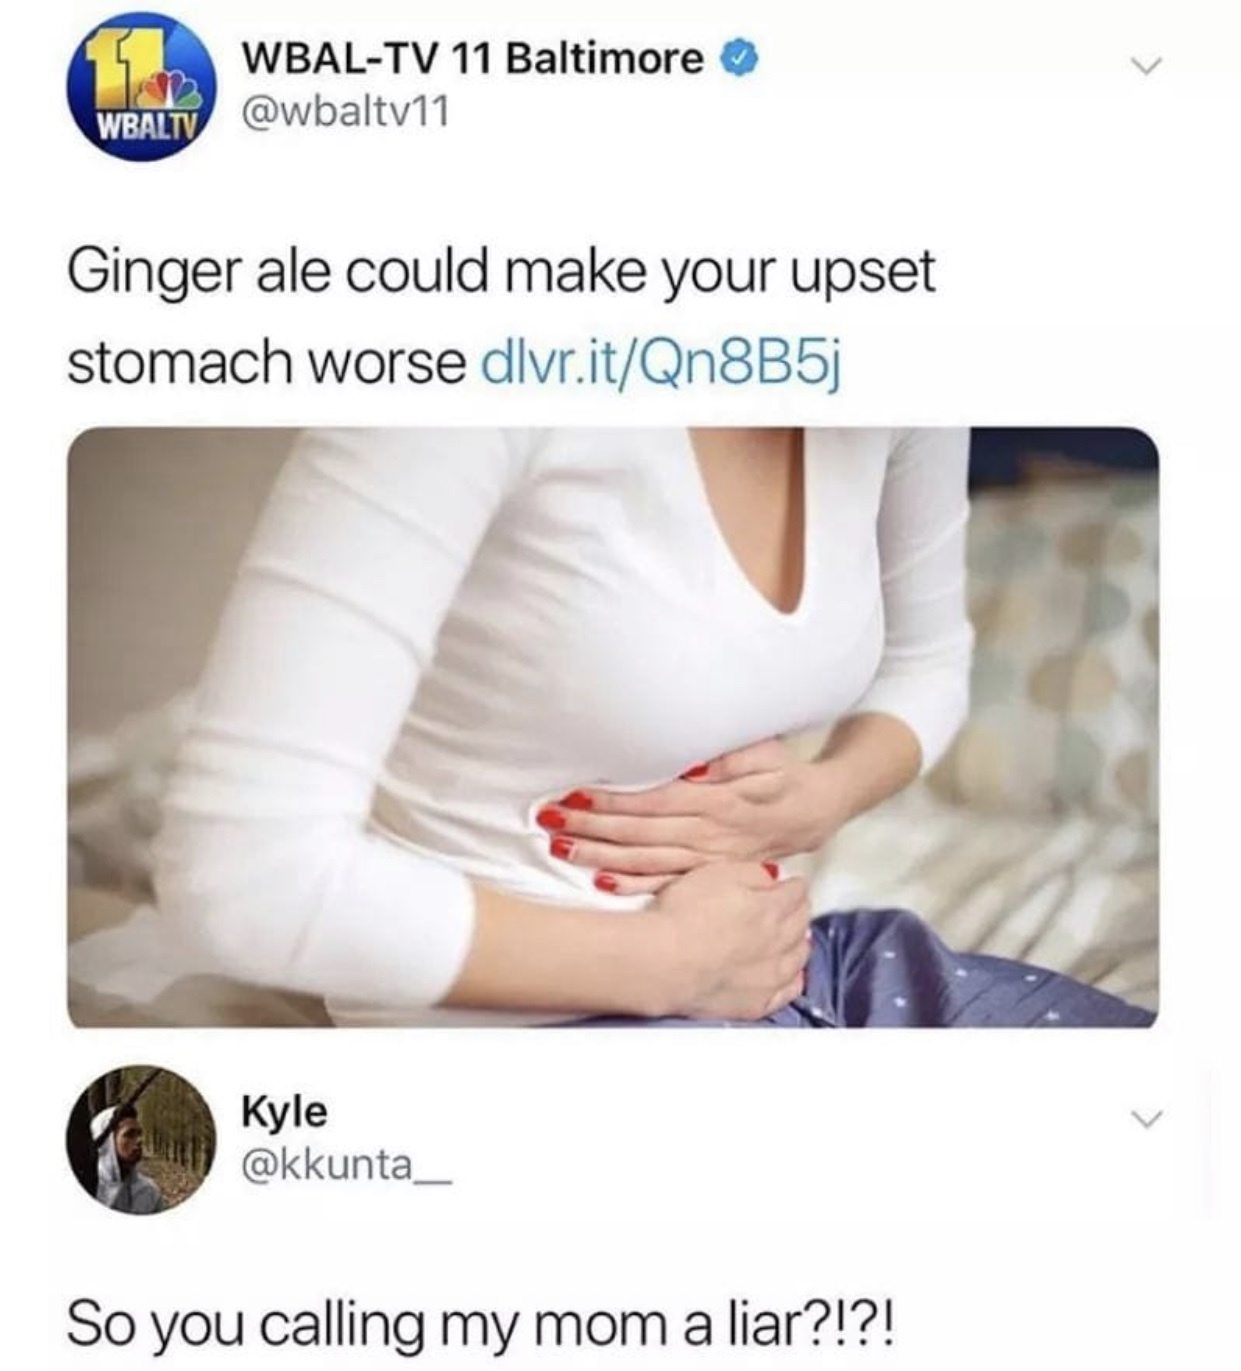 so you calling my mom a liar - WbalTv 11 Baltimore Wbaltv Ginger ale could make your upset stomach worse dlvr.itQn8B5j Kyle So you calling my mom a liar?!?!